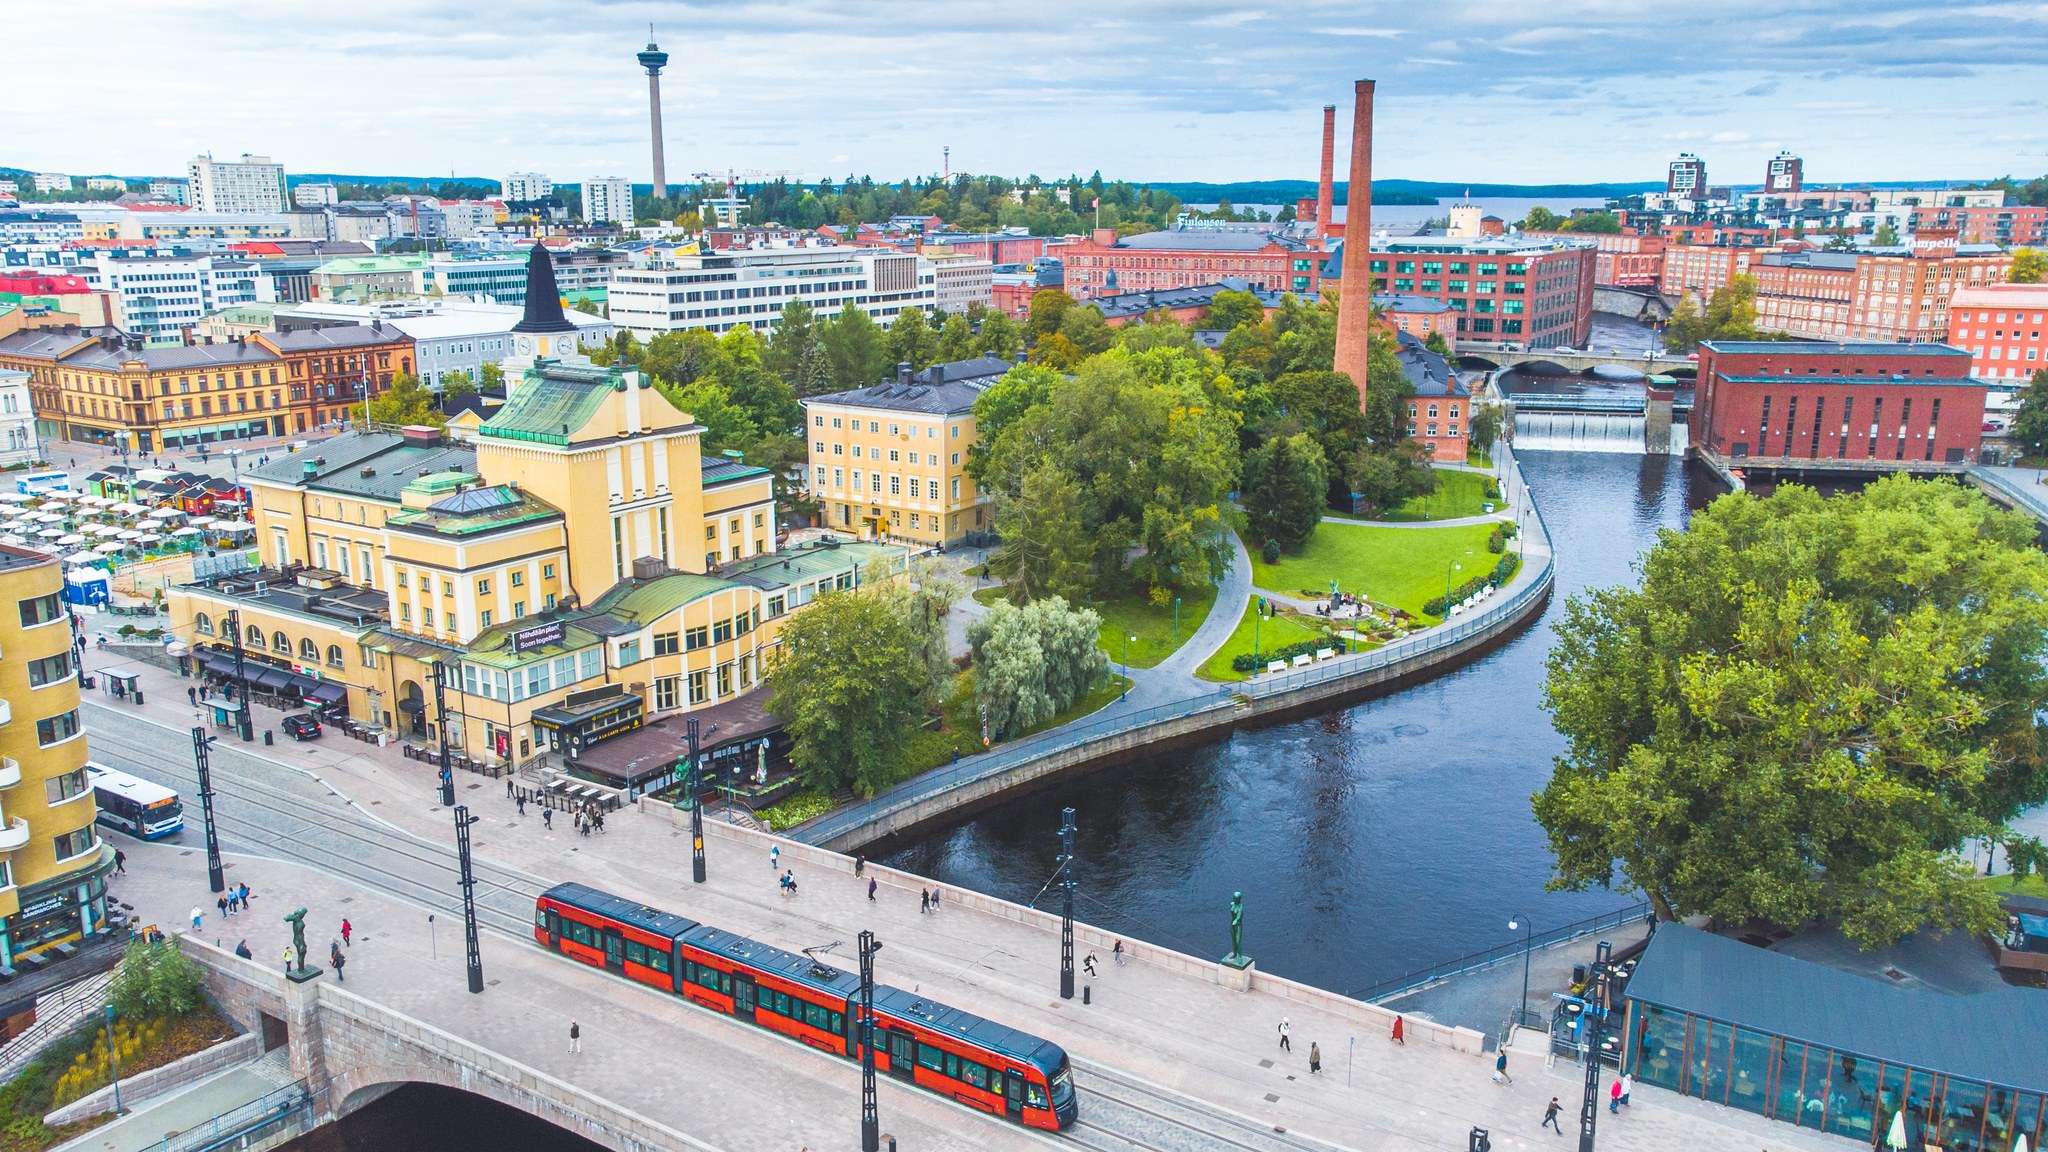 SC Software delivers an electronic sourcing and tendering solution to the City of Tampere